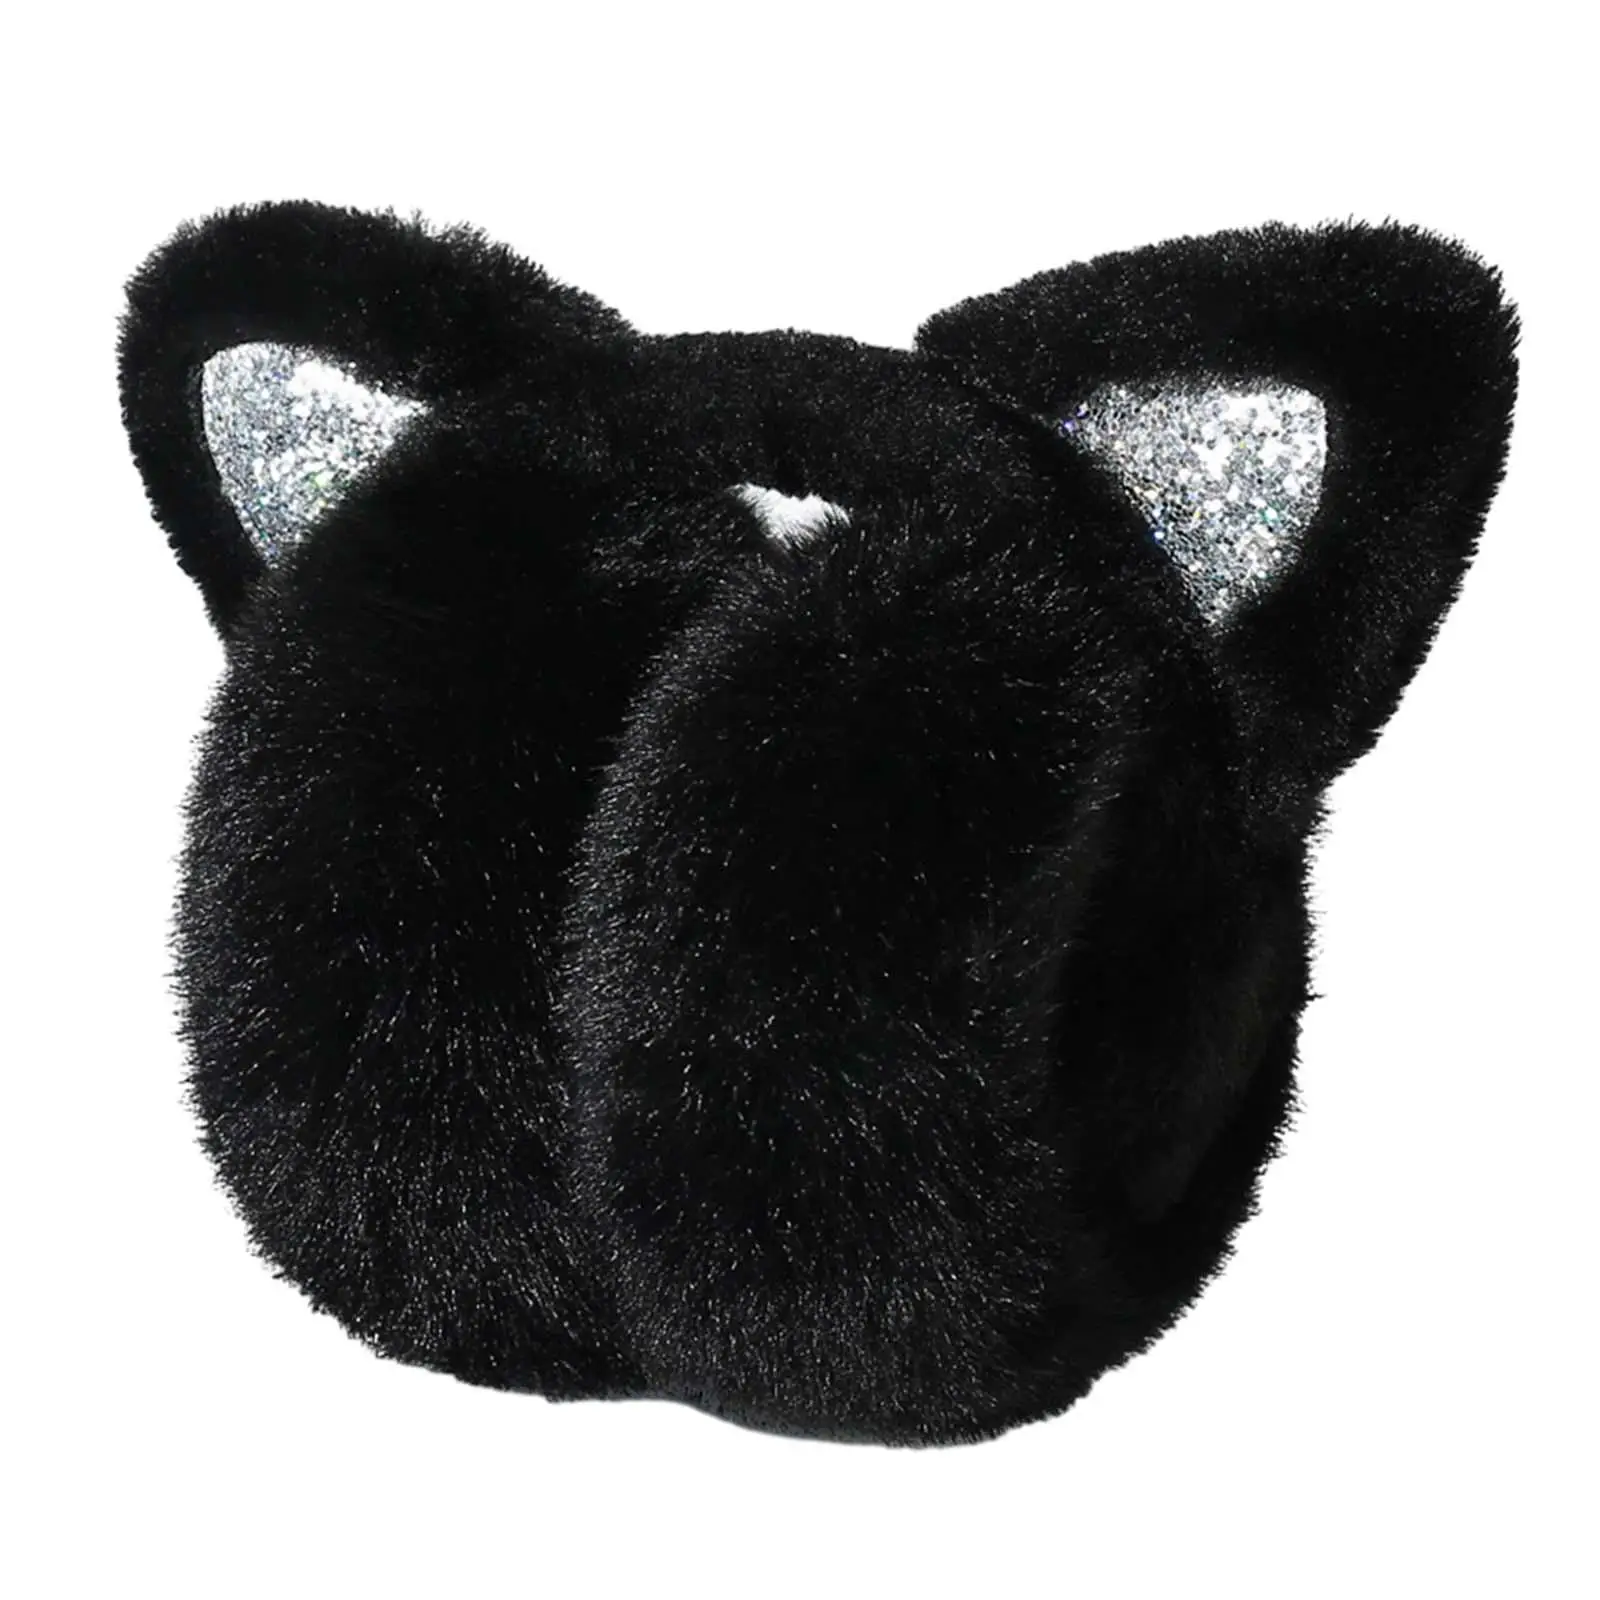 Earmuffs Soft Warm Polyester Premium Foldable Winter Ear Muffs Ear Warmers Ear Cover for Outdoor Skiing Skating Traveling Riding